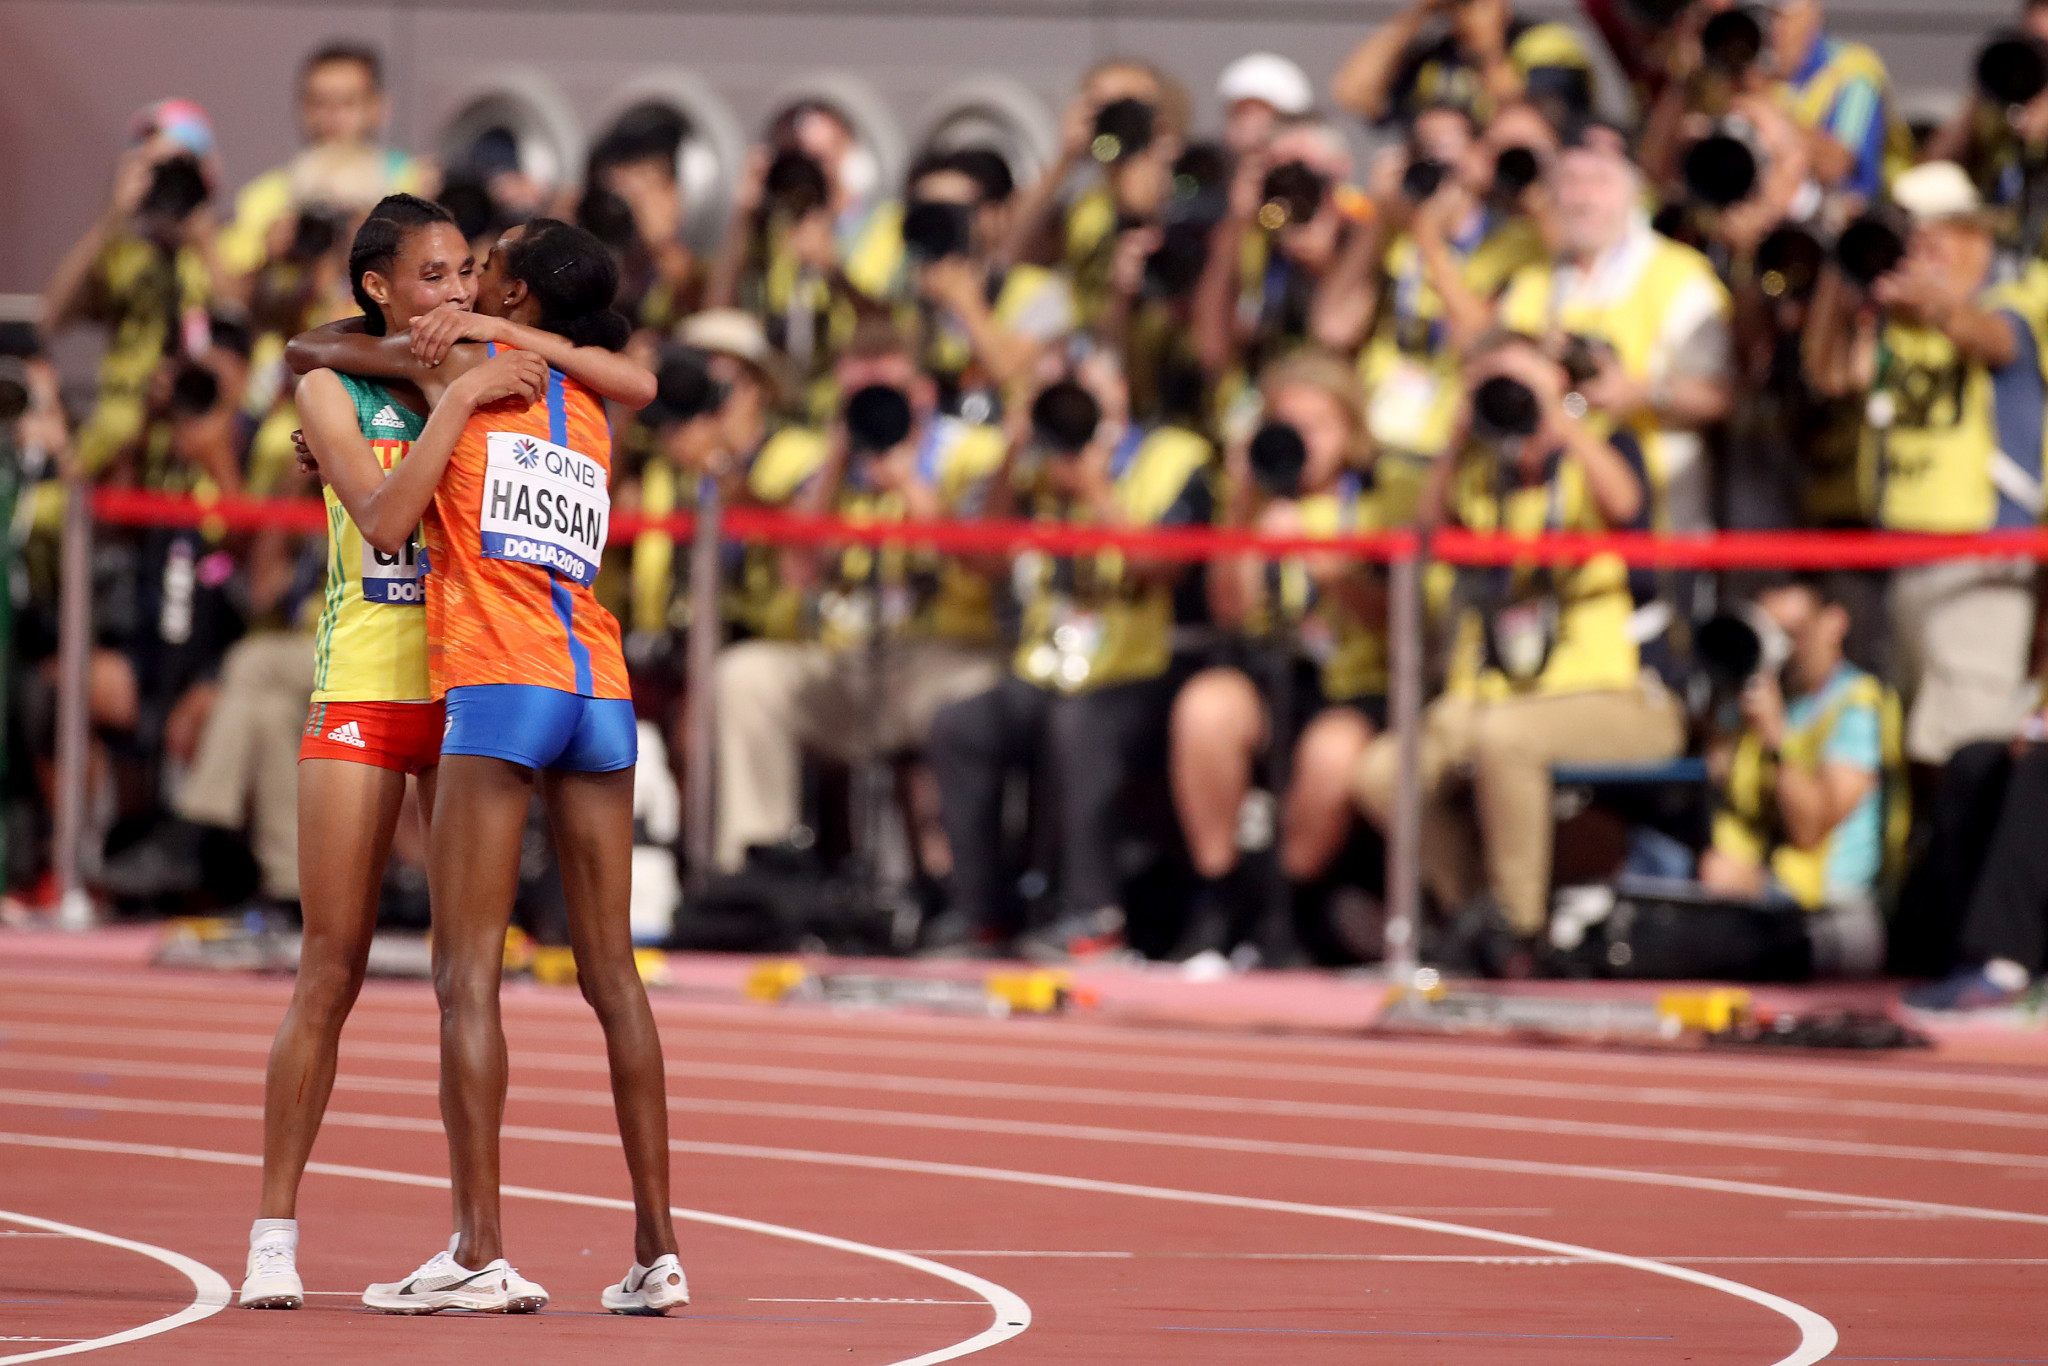 The Netherlands' Sifan Hassan won comfortably and afterwards embraced with the silver medallist, Ethopia's Letesenbet Gidey, as photographers captured the moment ©Getty Images